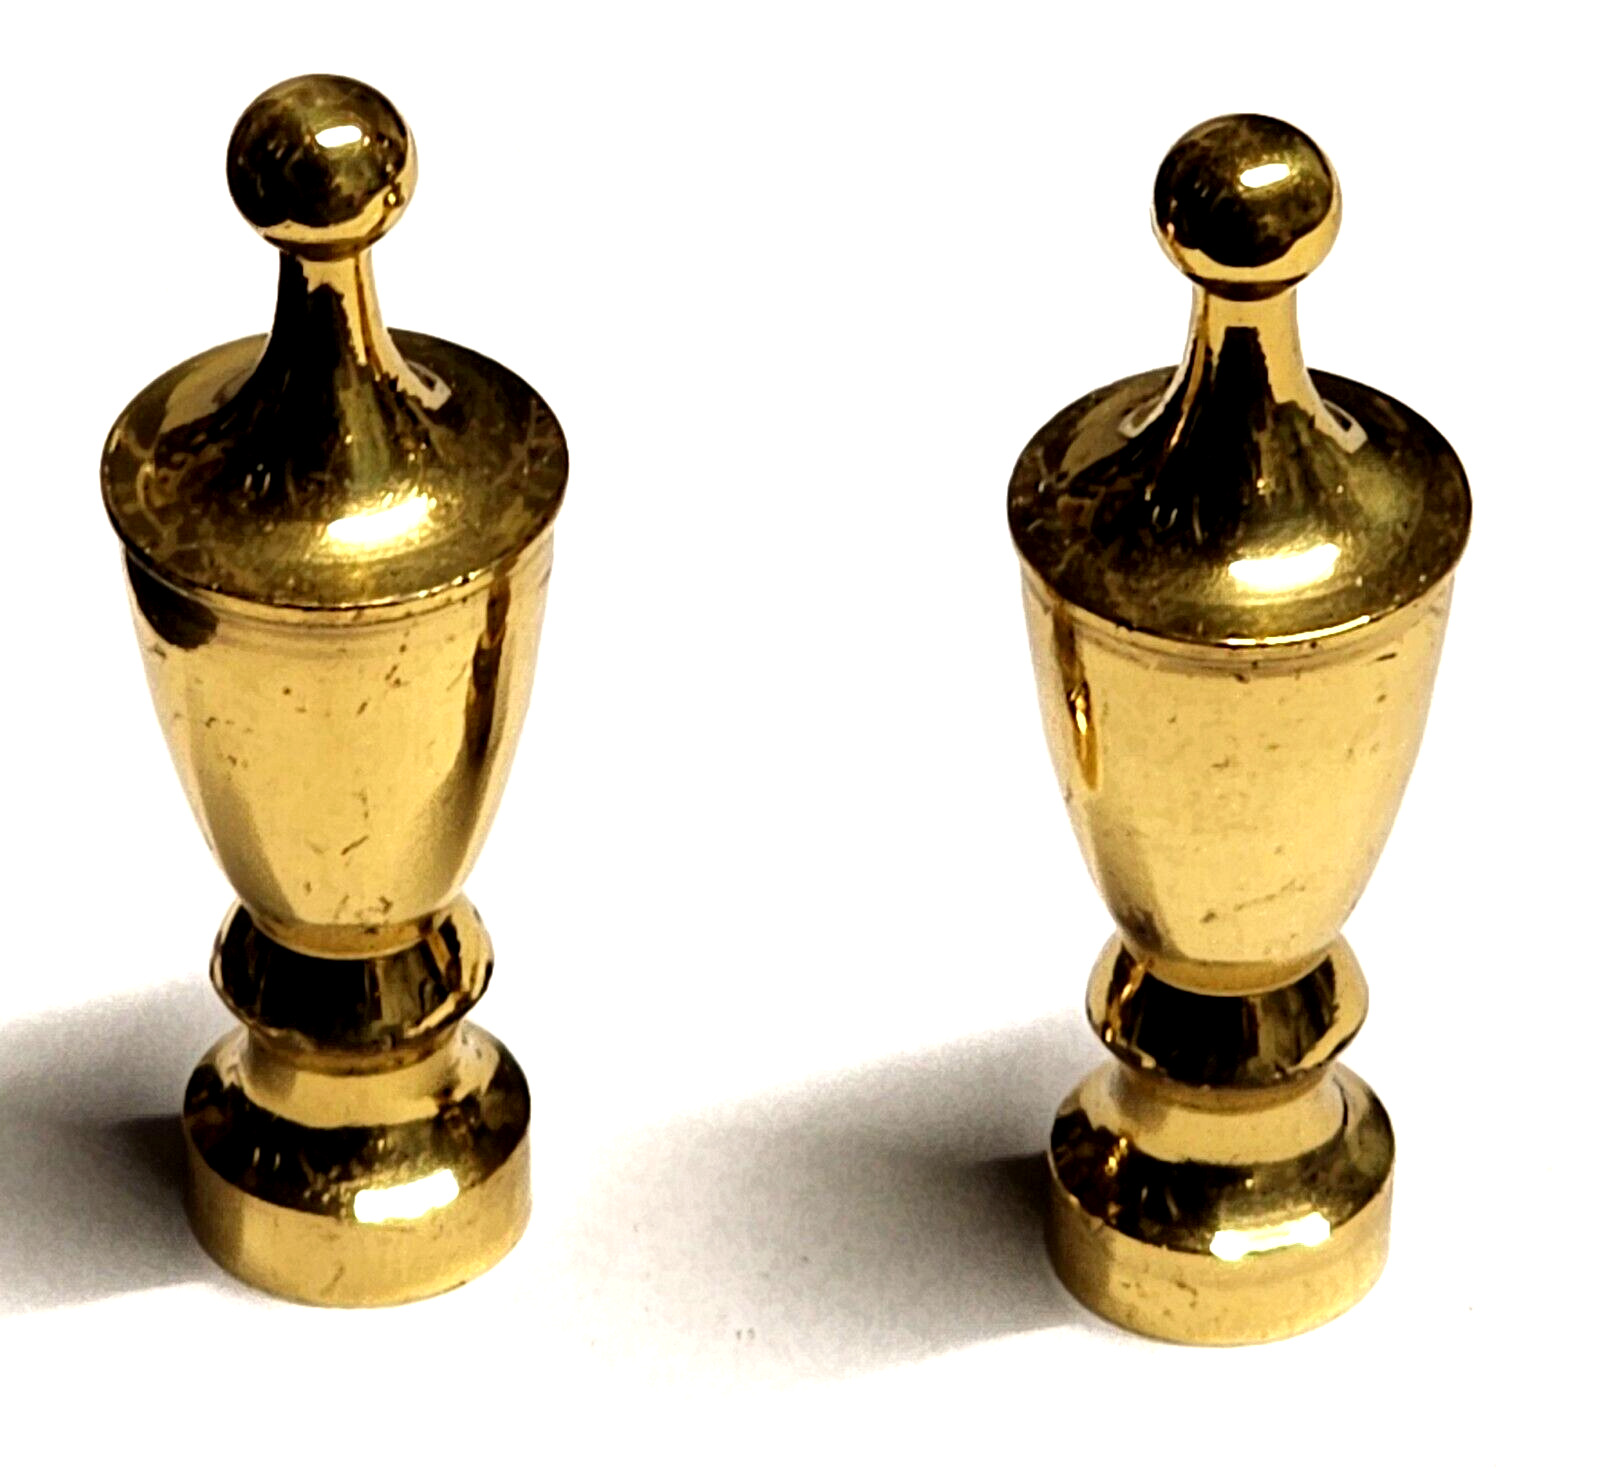 Lamp Finial-MODERN URN Solid Brass Finish Machined and Highly Detailed 1 piece